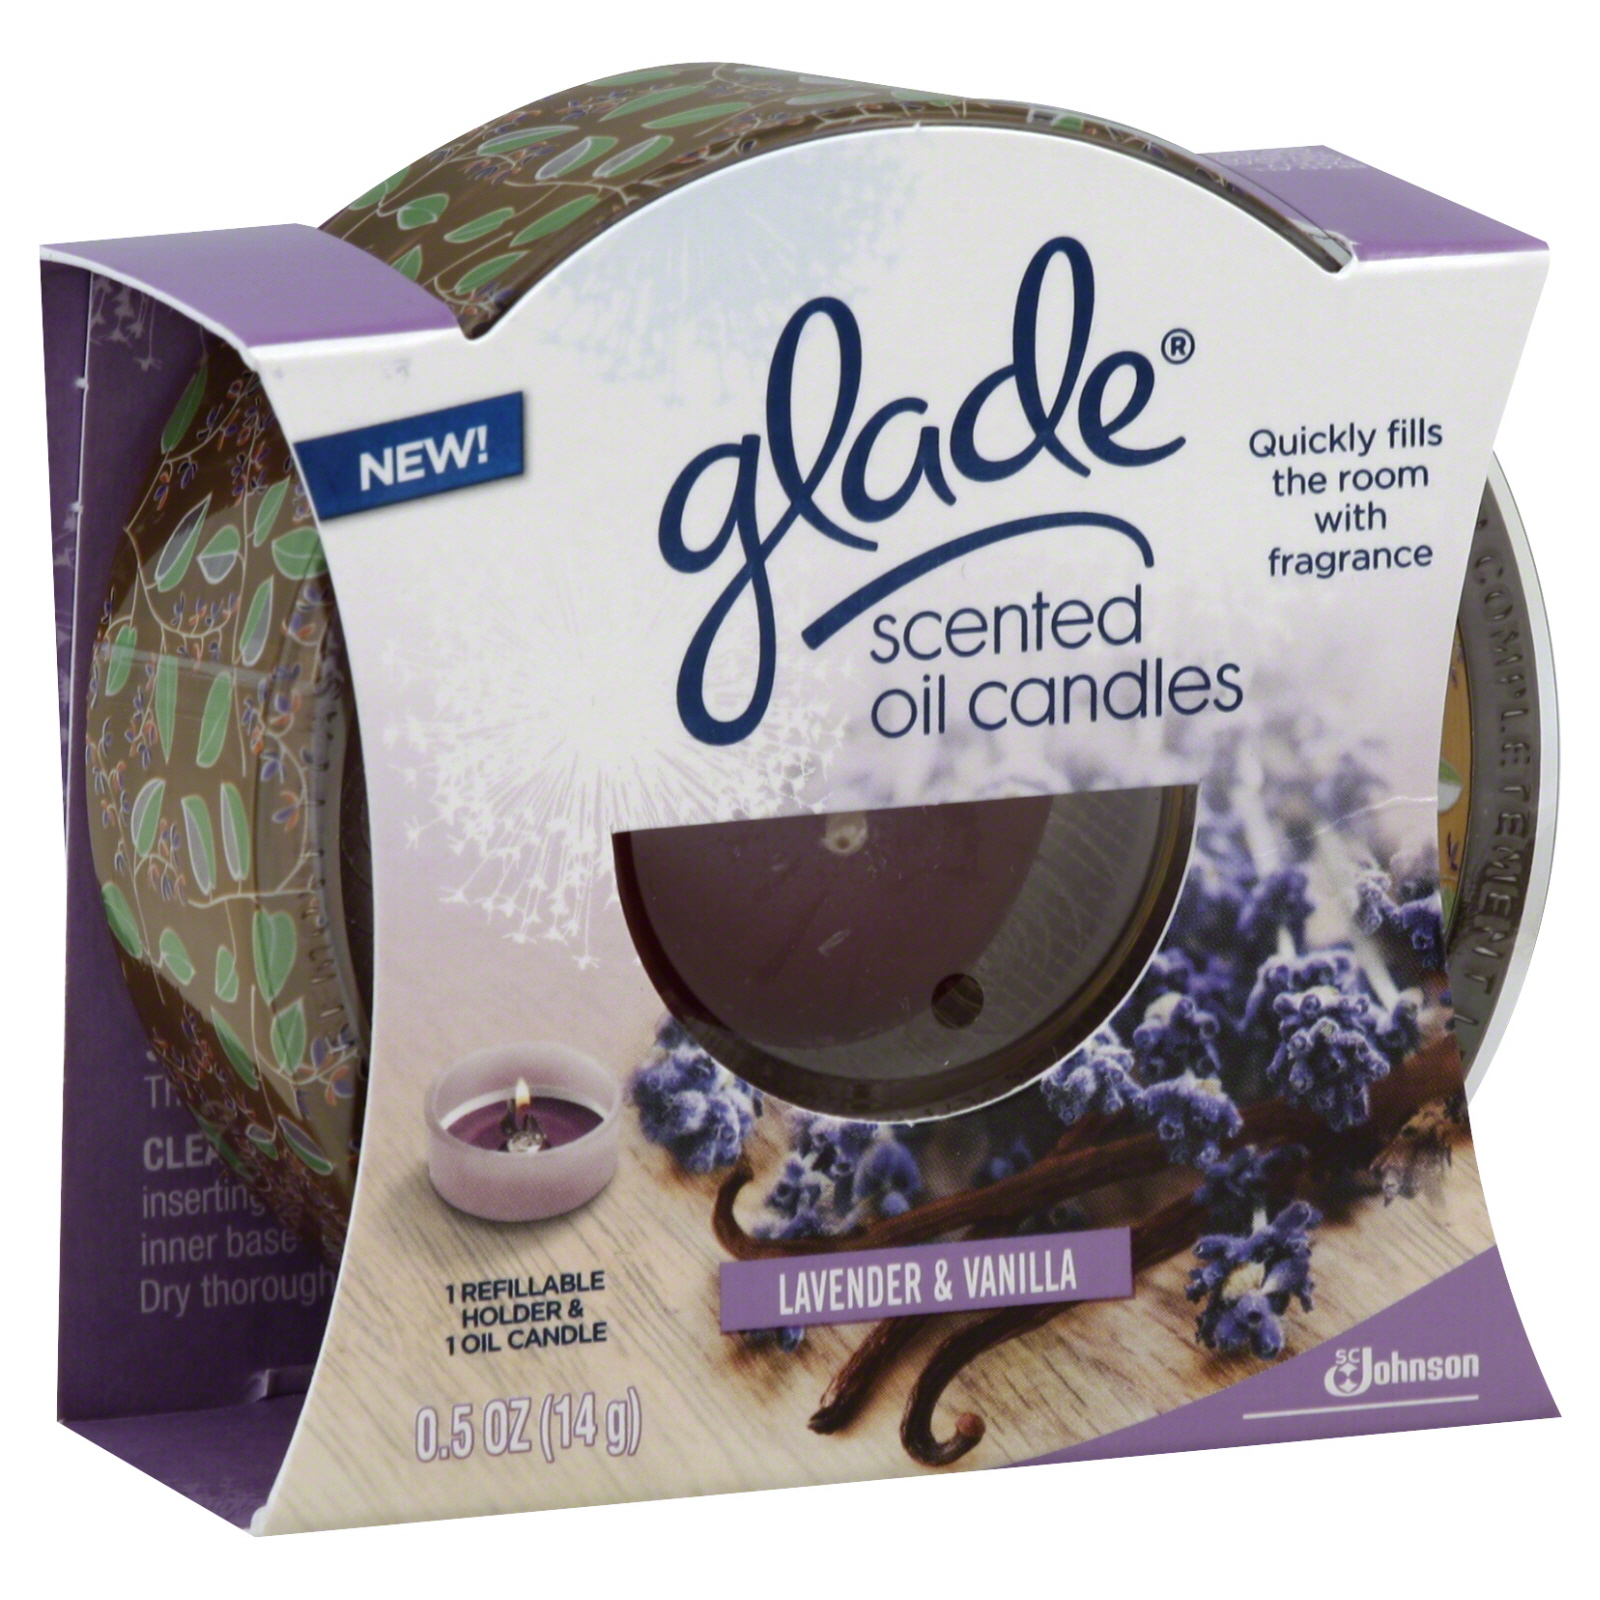 Glade Scented Oil Candle, Lavender & Vanilla, 1 candle [0.5 oz (14 g)]